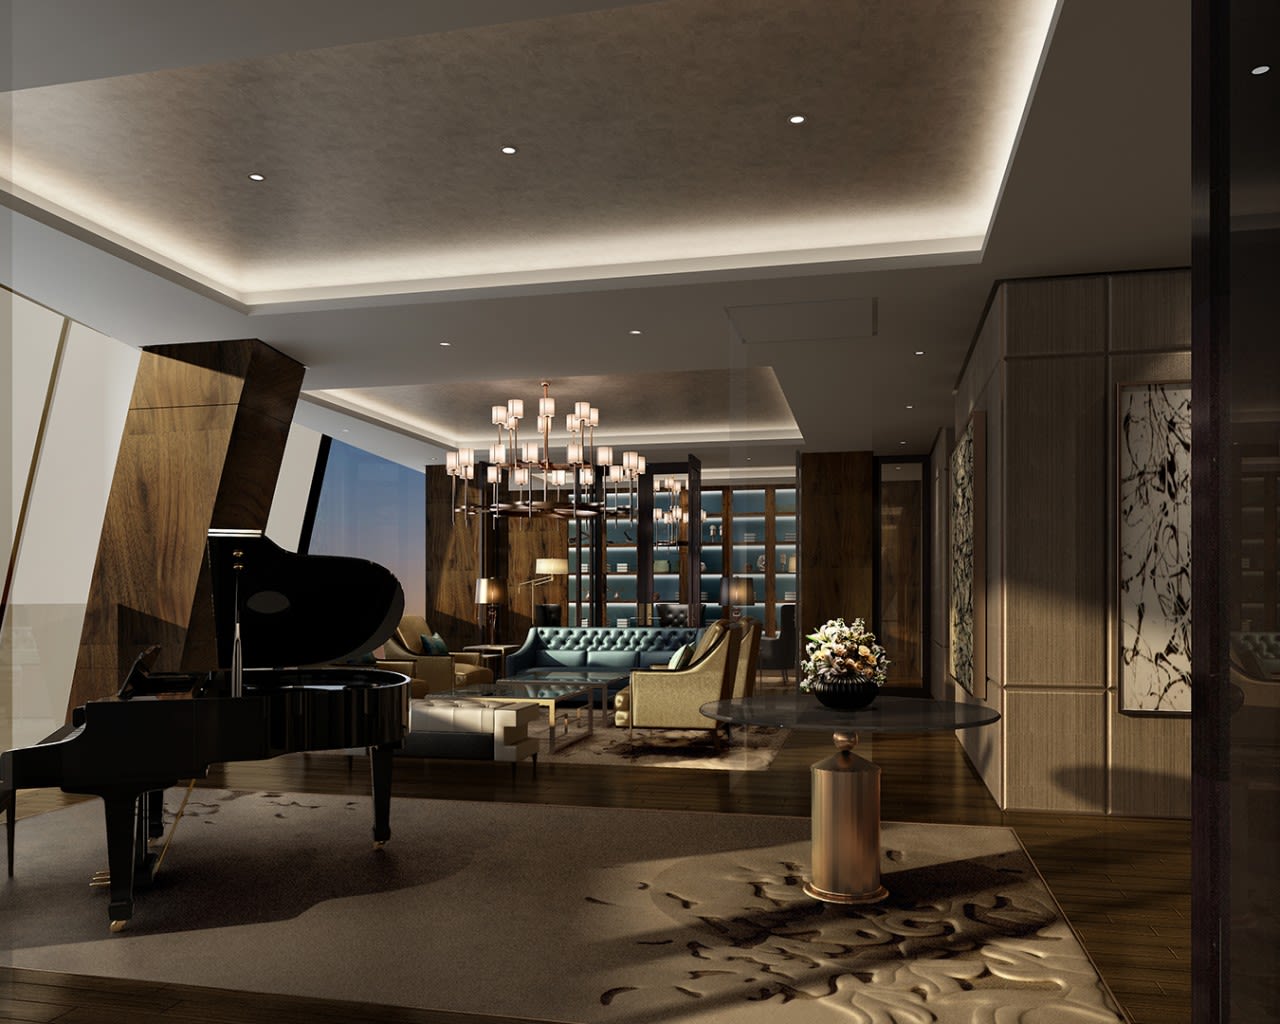 The Sunrise Kempinski's presidential suite. The 21-floor building has 306 guestrooms and suites. 